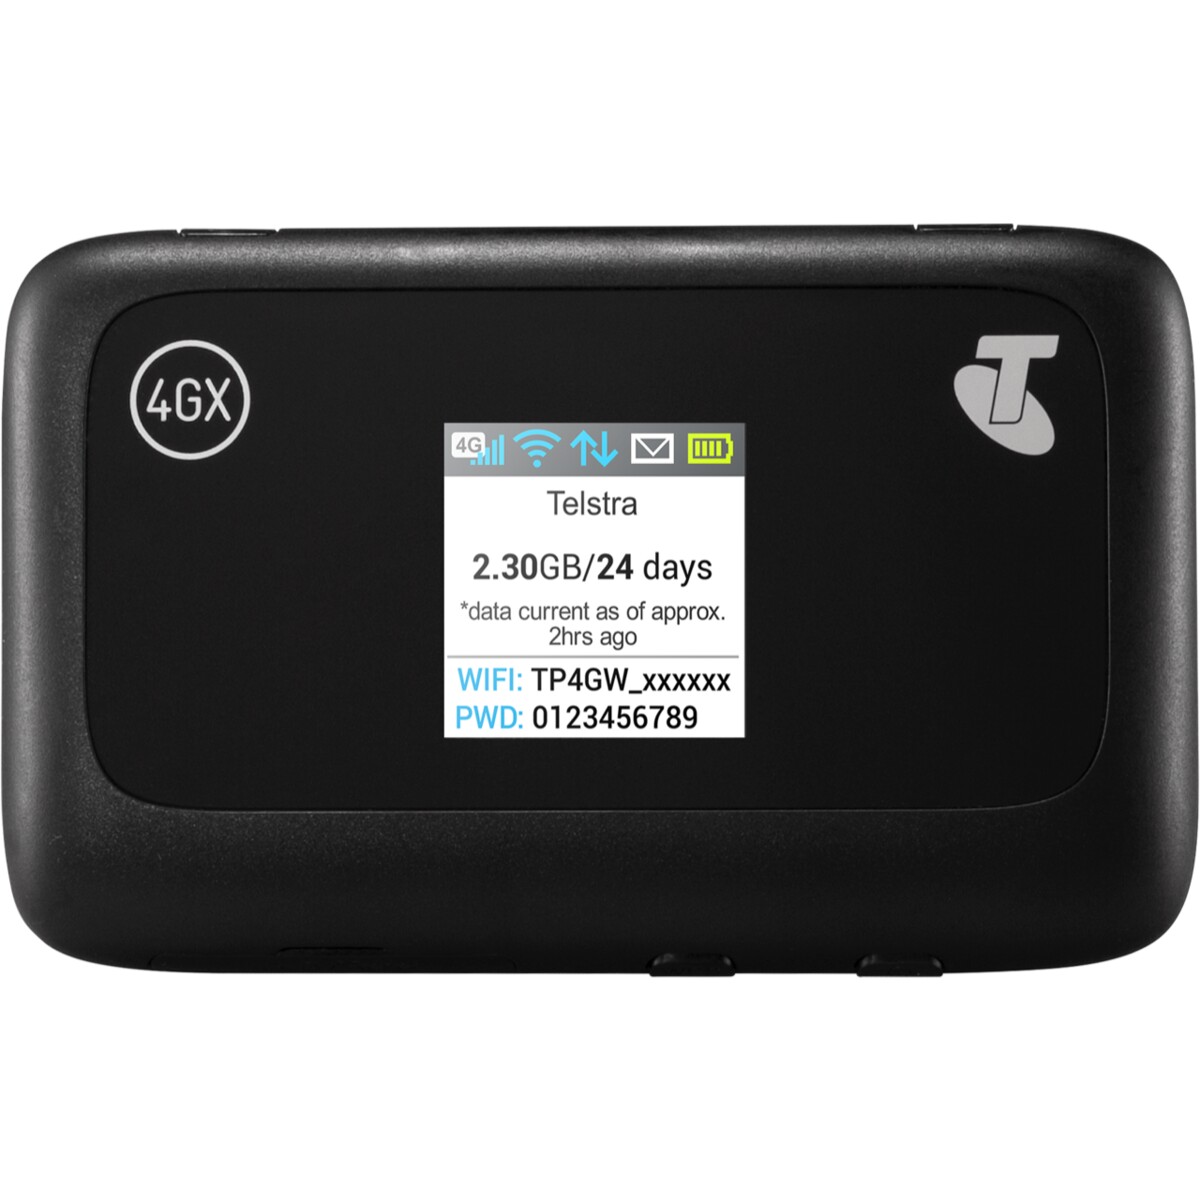 Telstra Pre-Paid 4GX Wi-Fi Plus - Black, Includes Pre-Paid SIM card + 5GB data Connect up to 10 Wi-Fi enabled devices, Battery life up to 8 hours,